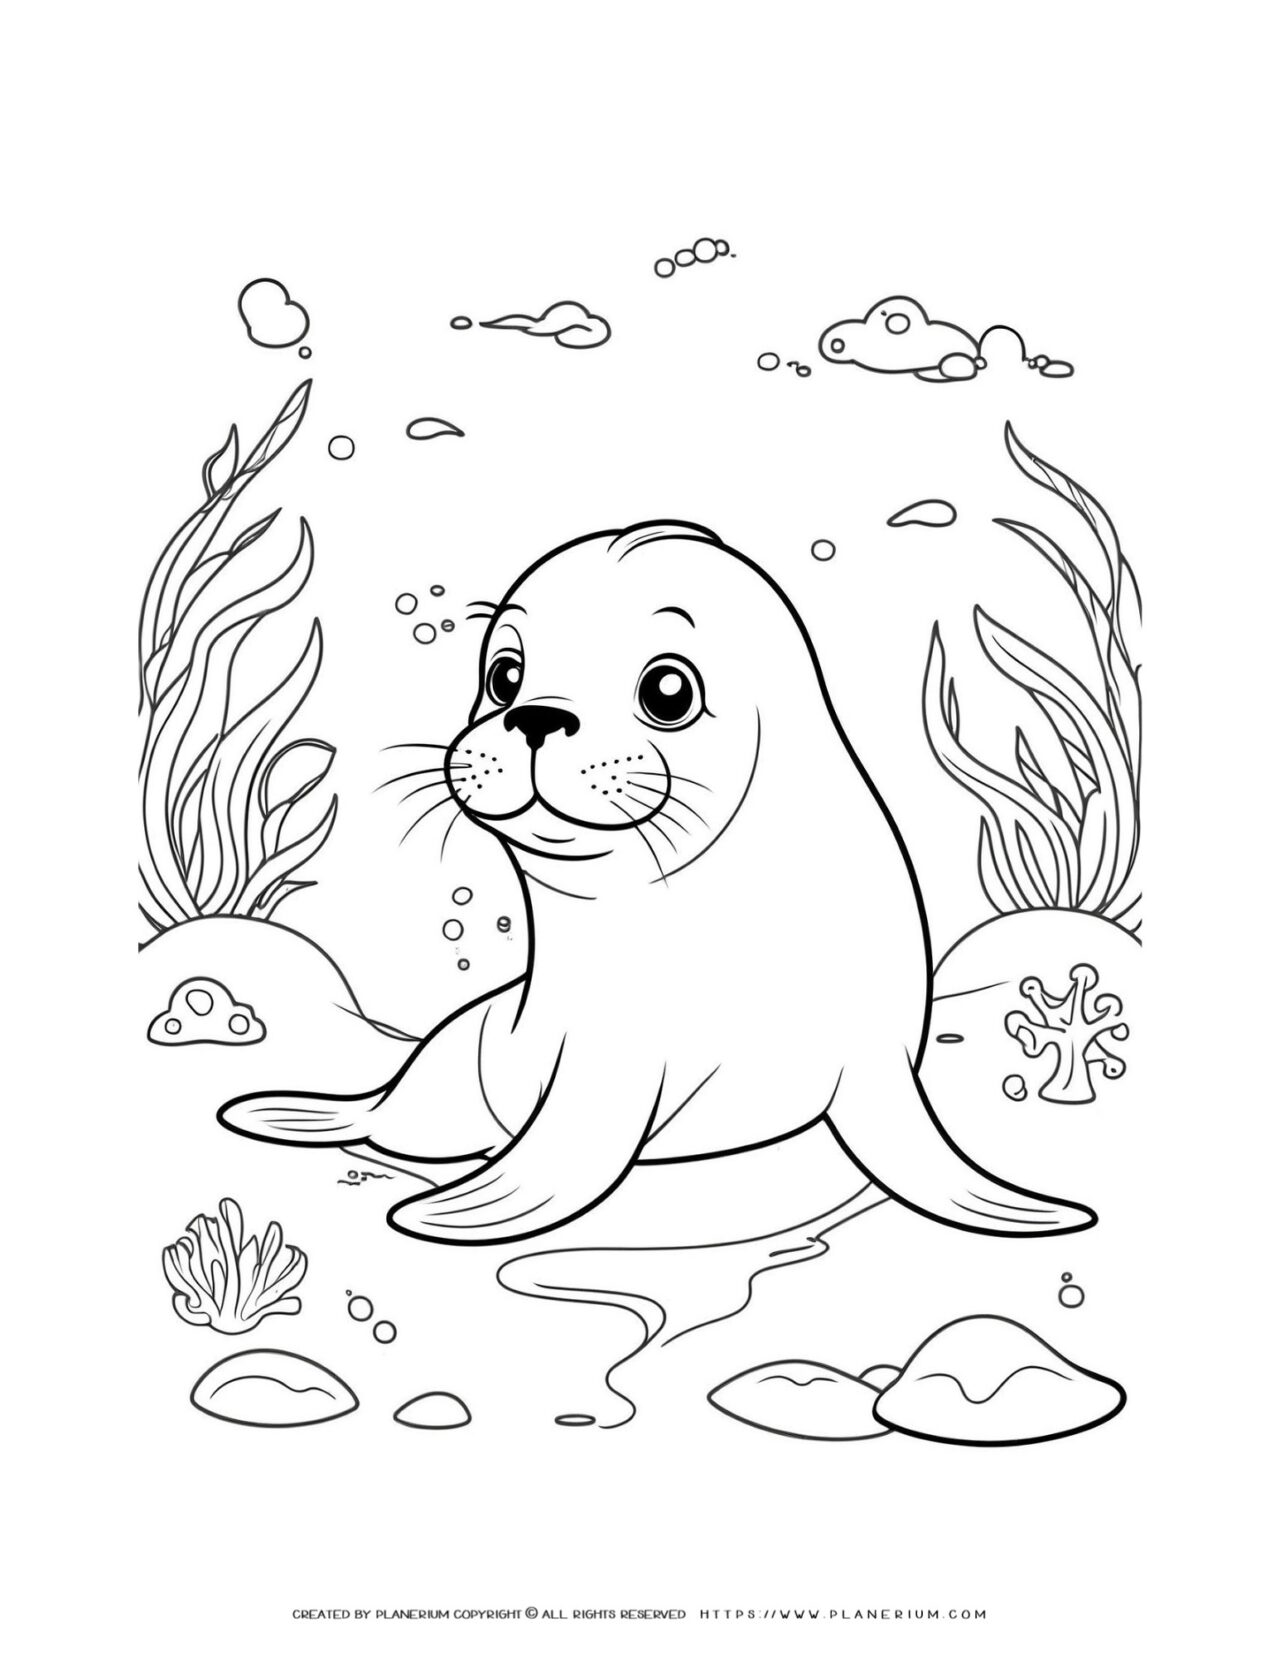 Seal-coloring-page-for-childrens-underwater-theme-activity